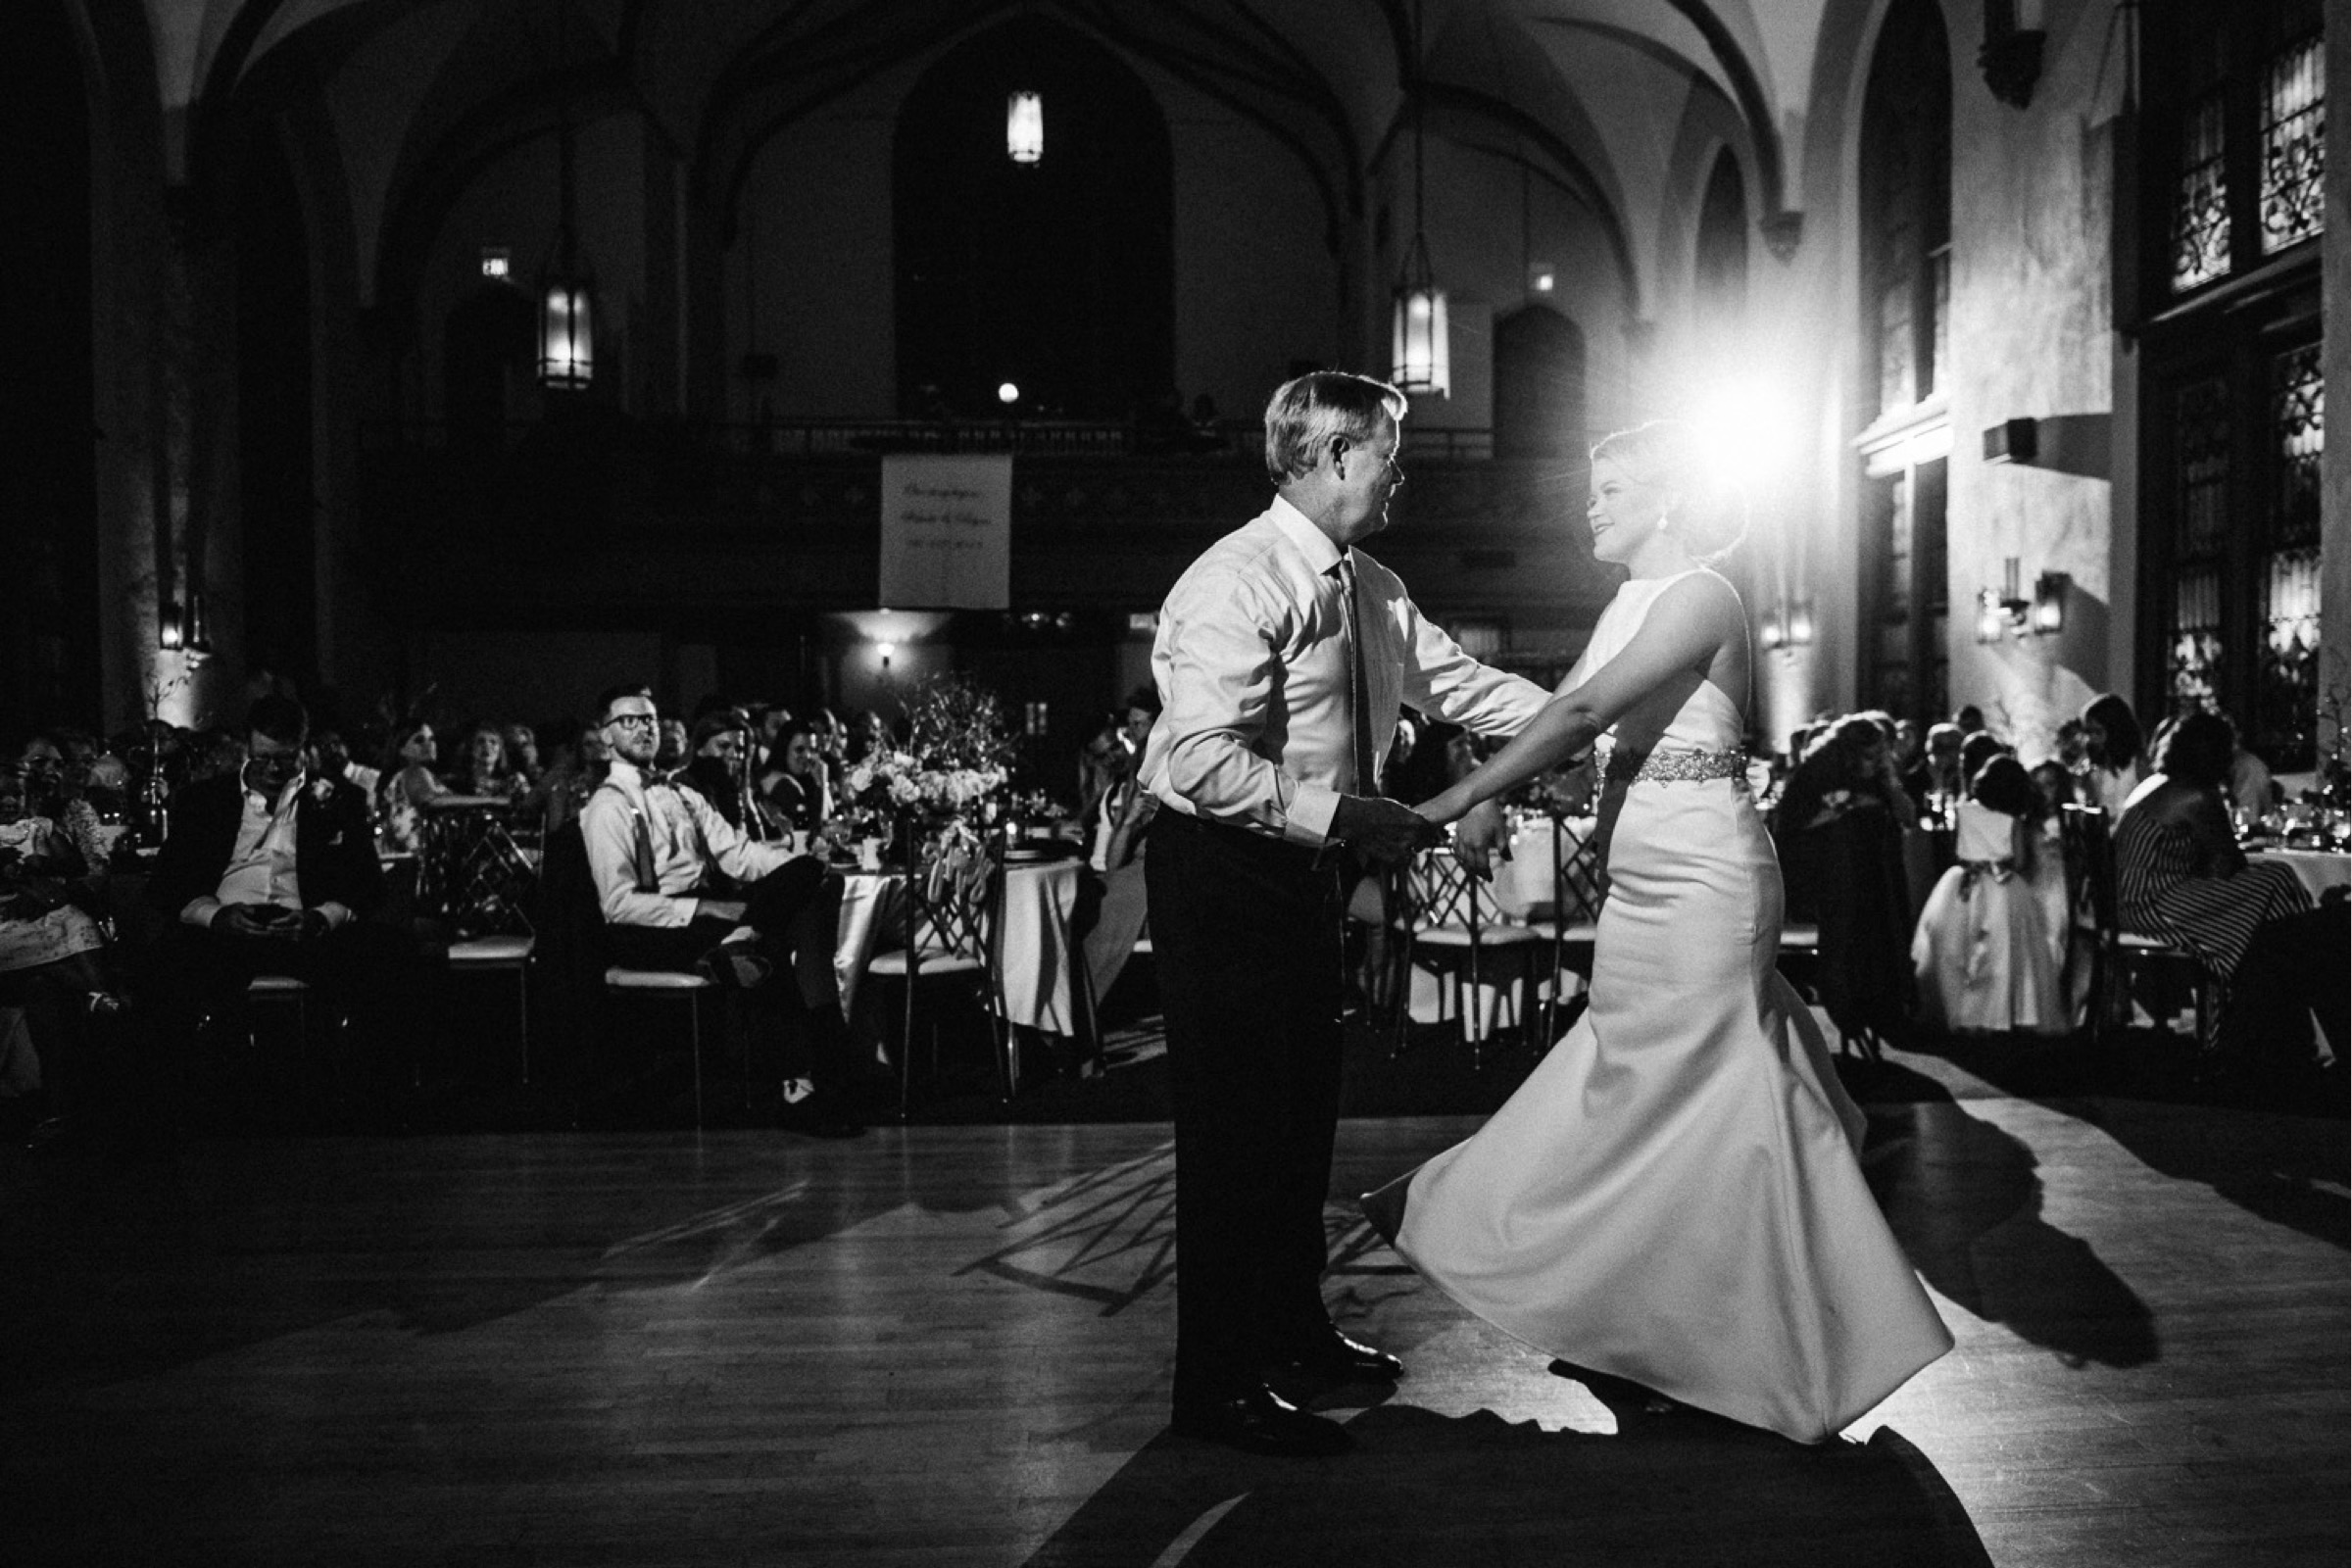 the bride dances with her father during the reception portion of the wedding day timeline